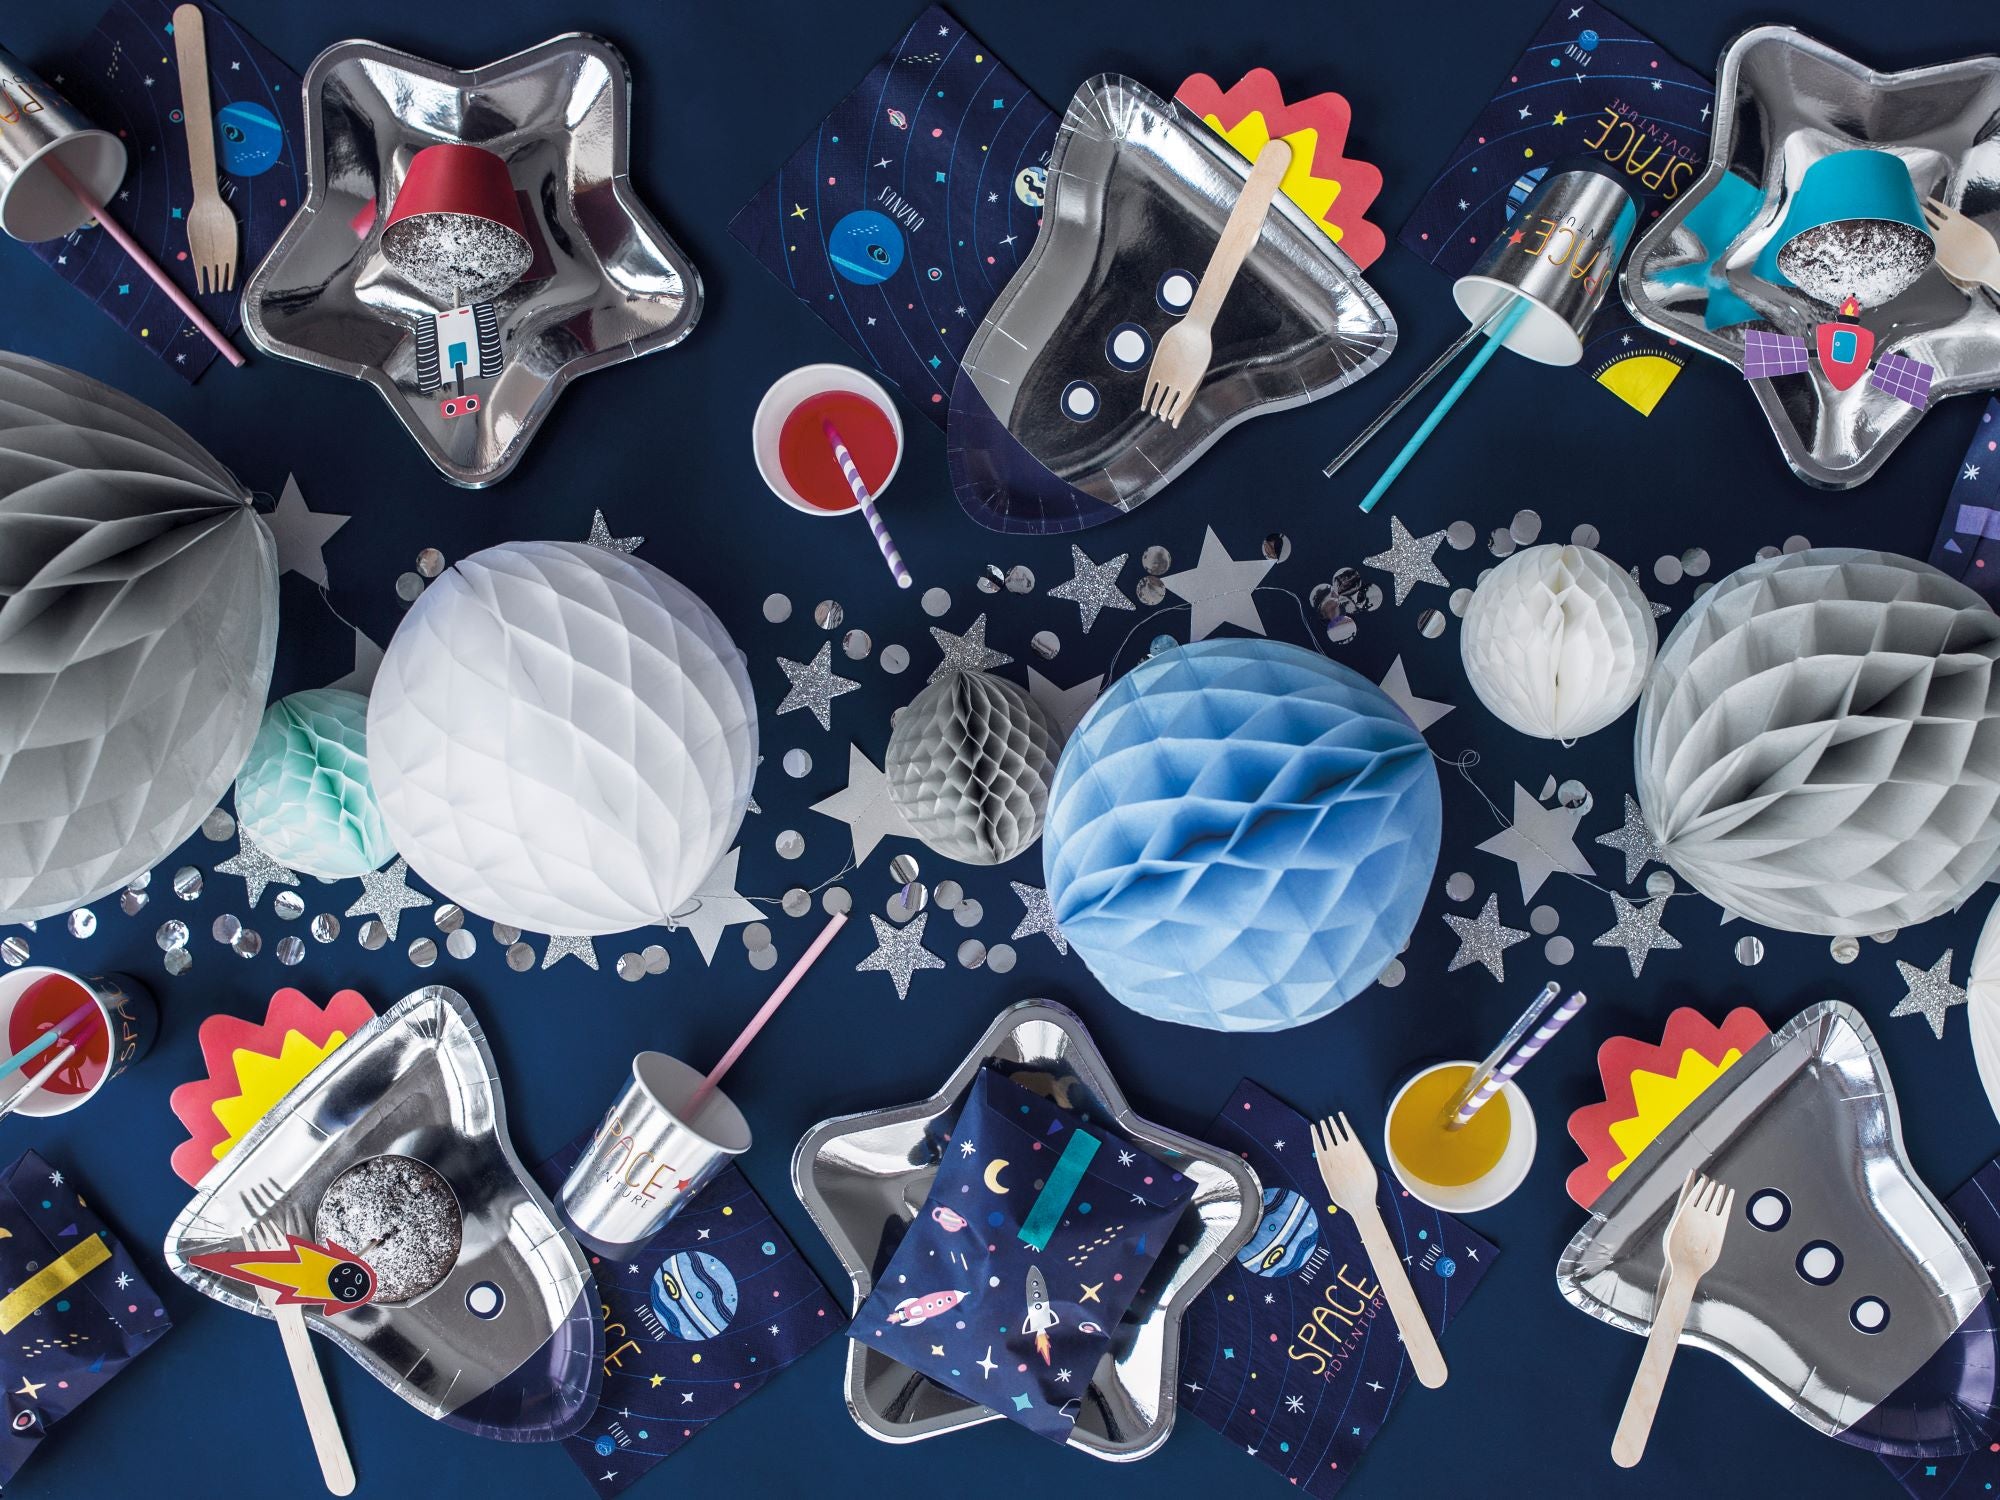 Space Theme Party Decorations and Supplies